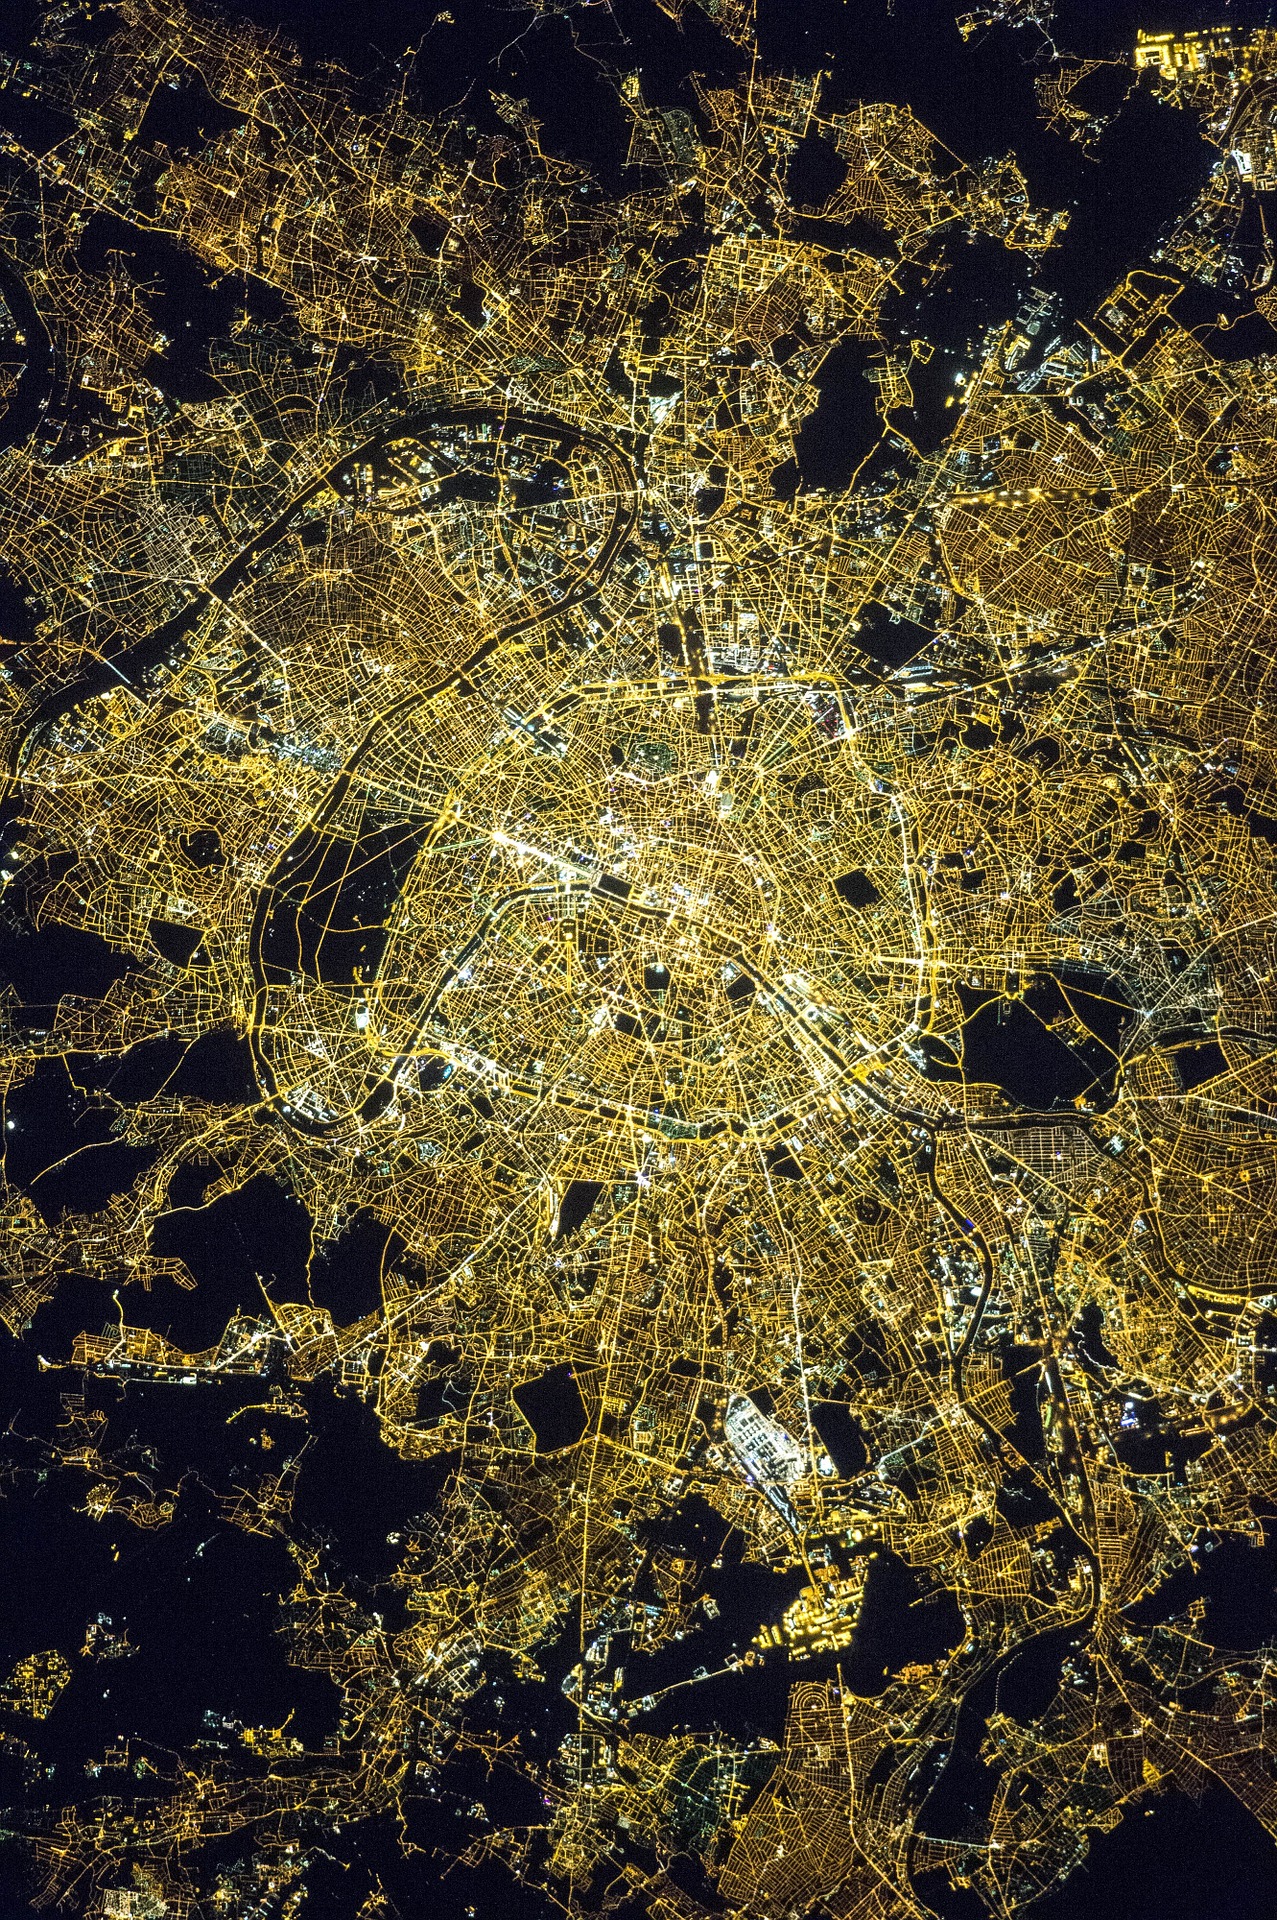 Paris from space photo